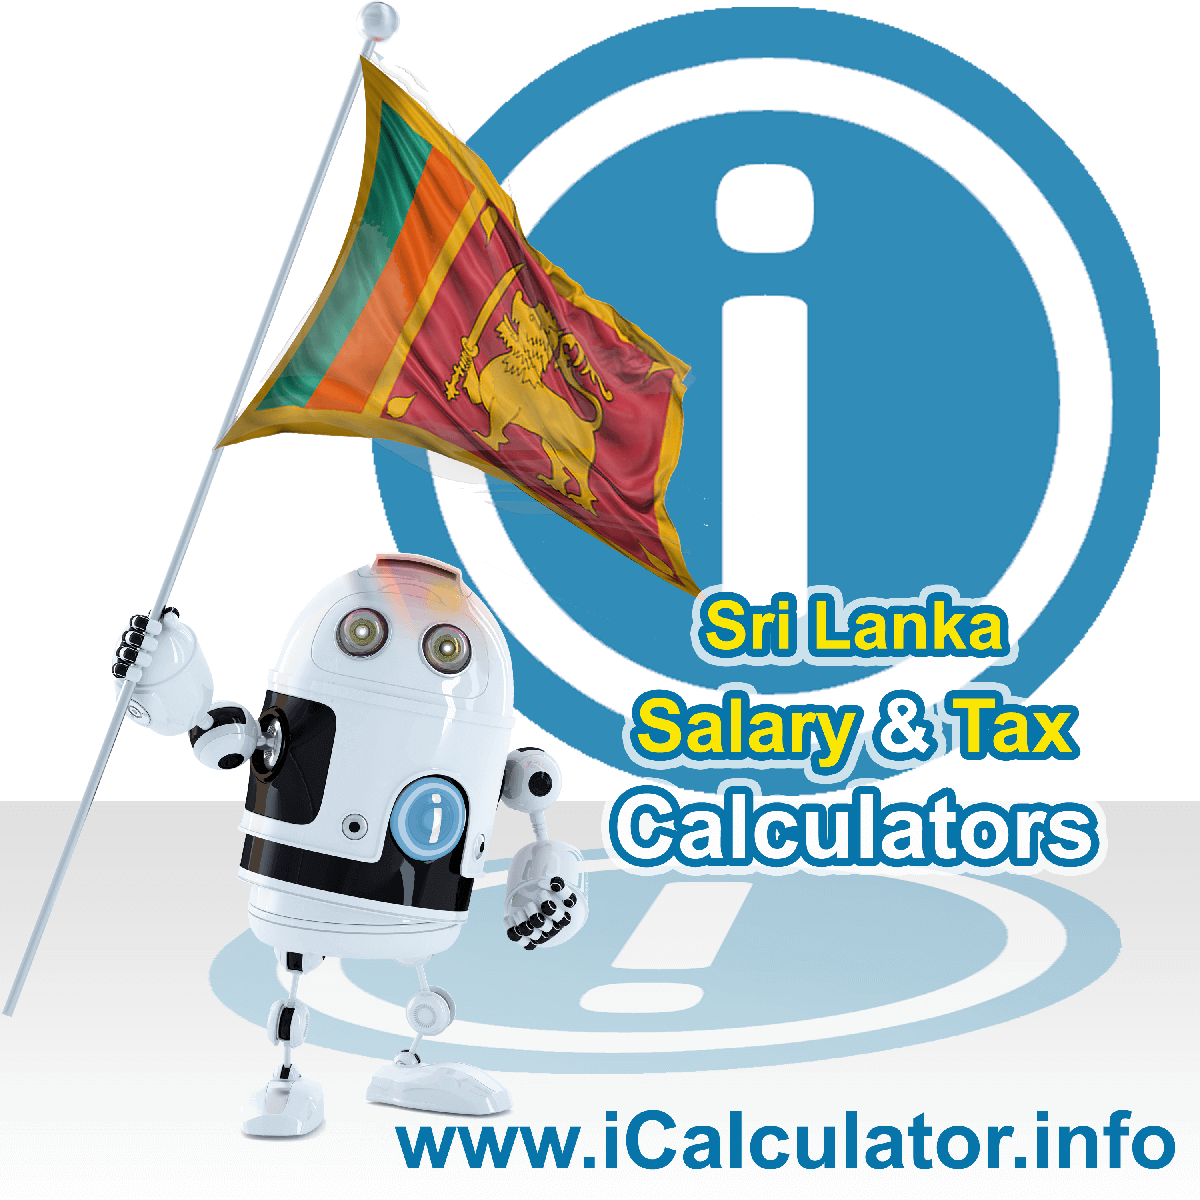 Sri Lanka Tax Calculator. This image shows the Sri Lanka flag and information relating to the tax formula for the Sri Lanka Salary Calculator